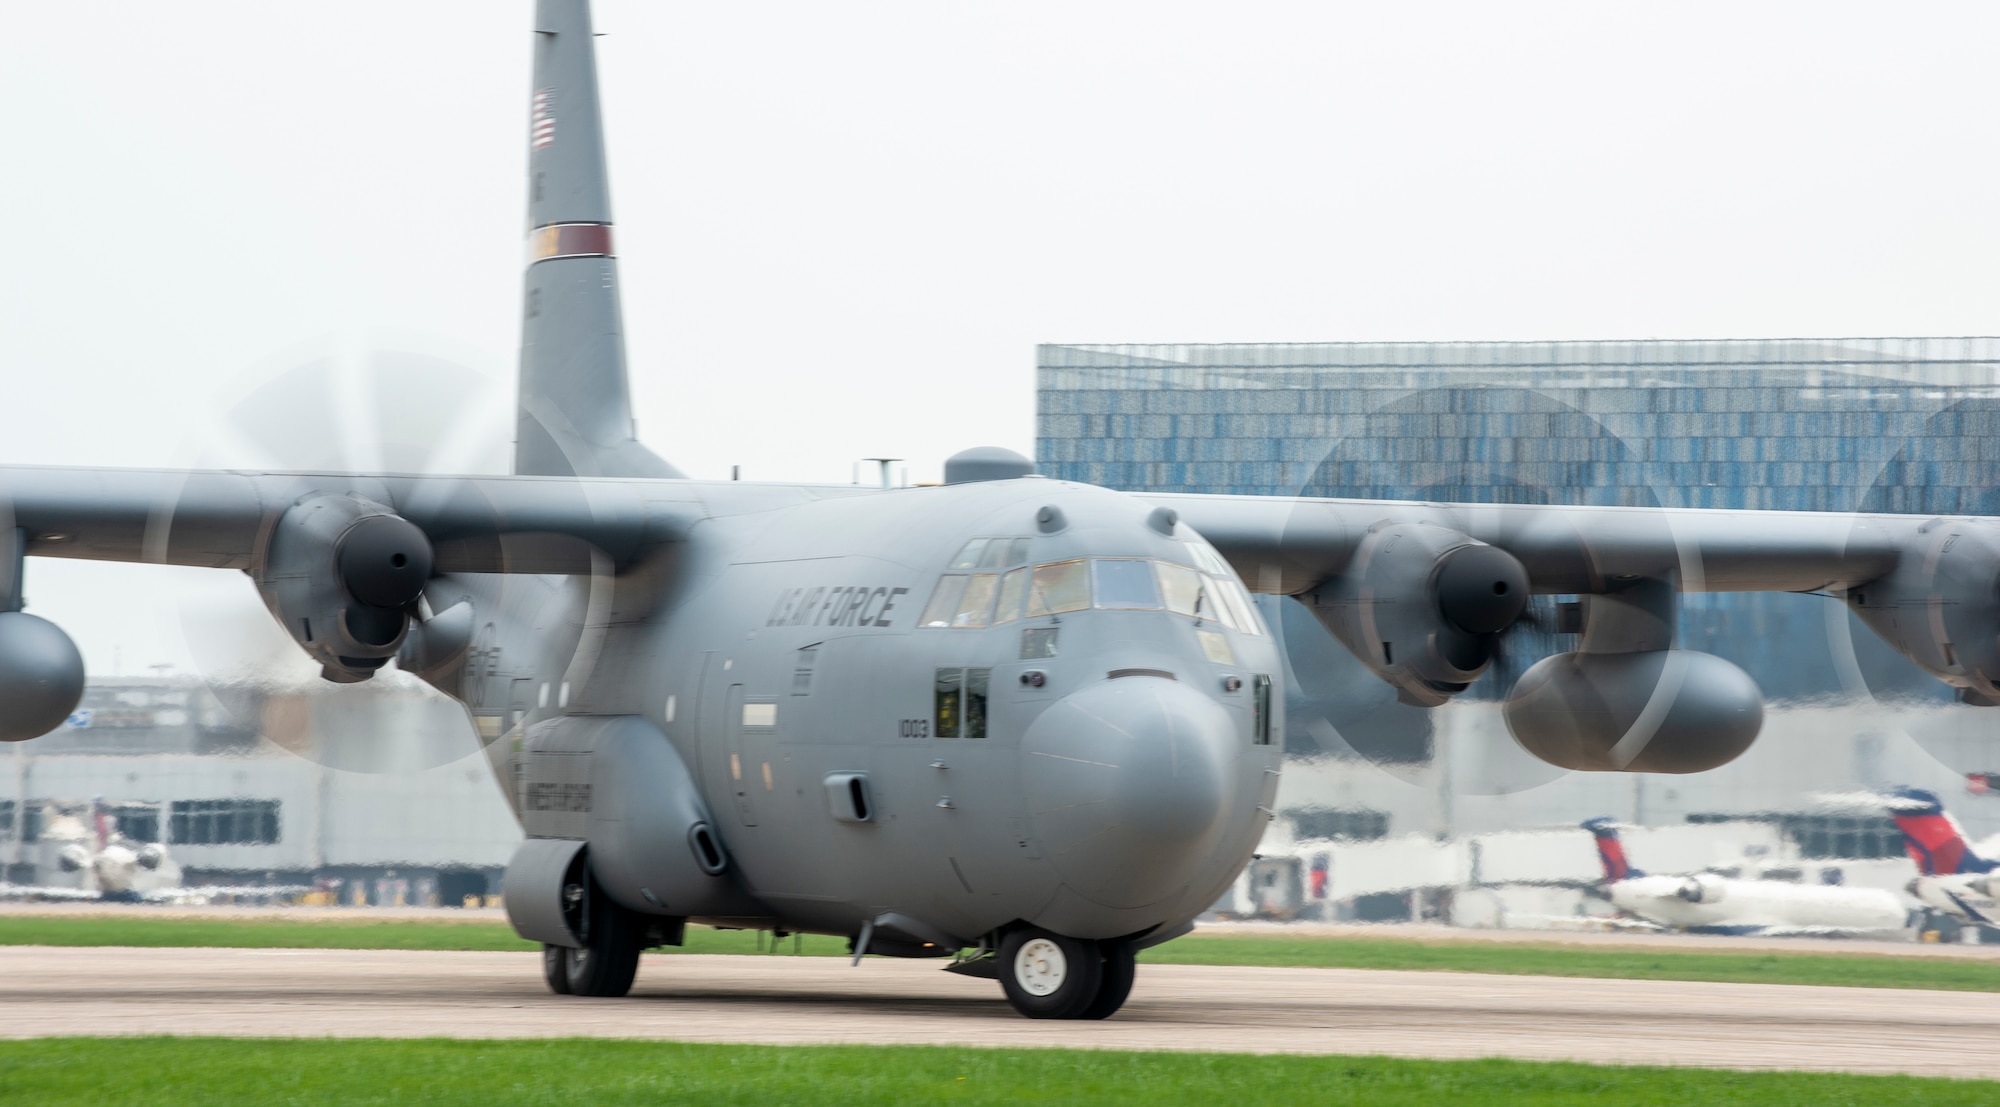 A C-130 Hercules from the 133rd Airlift Wing taxis to a parking spot on the flight line in St. Paul, Minn., May 11, 2022.